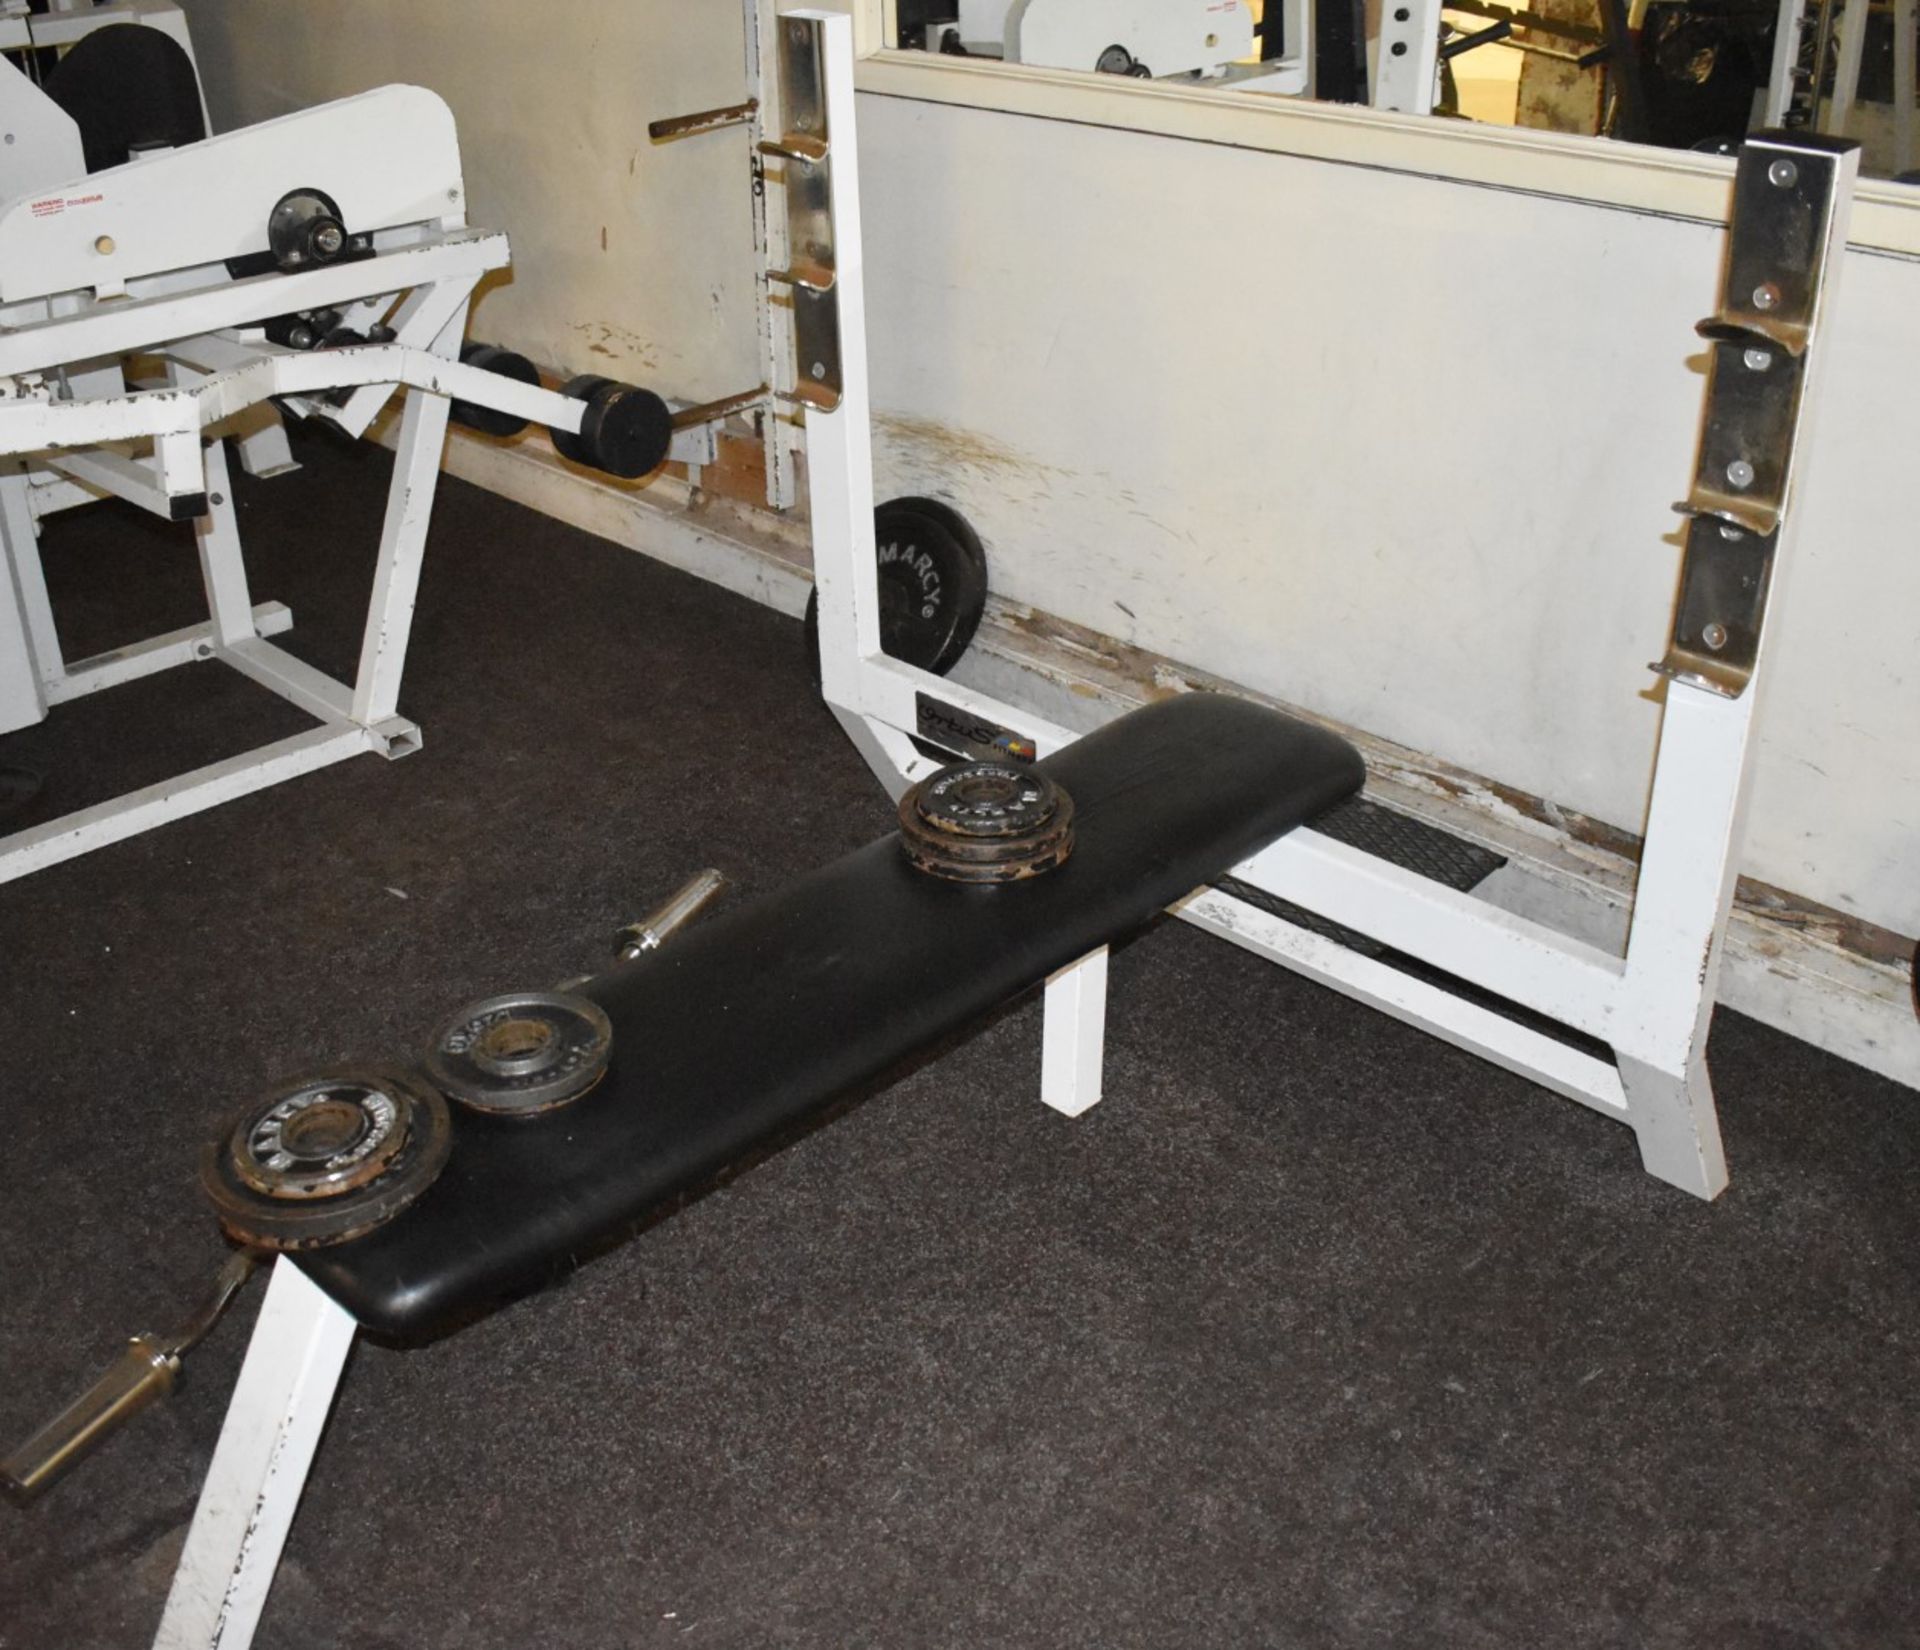 Contents of Bodybuilding and Strongman Gym - Includes Approx 30 Pieces of Gym Equipment, Floor Mats, - Image 16 of 95